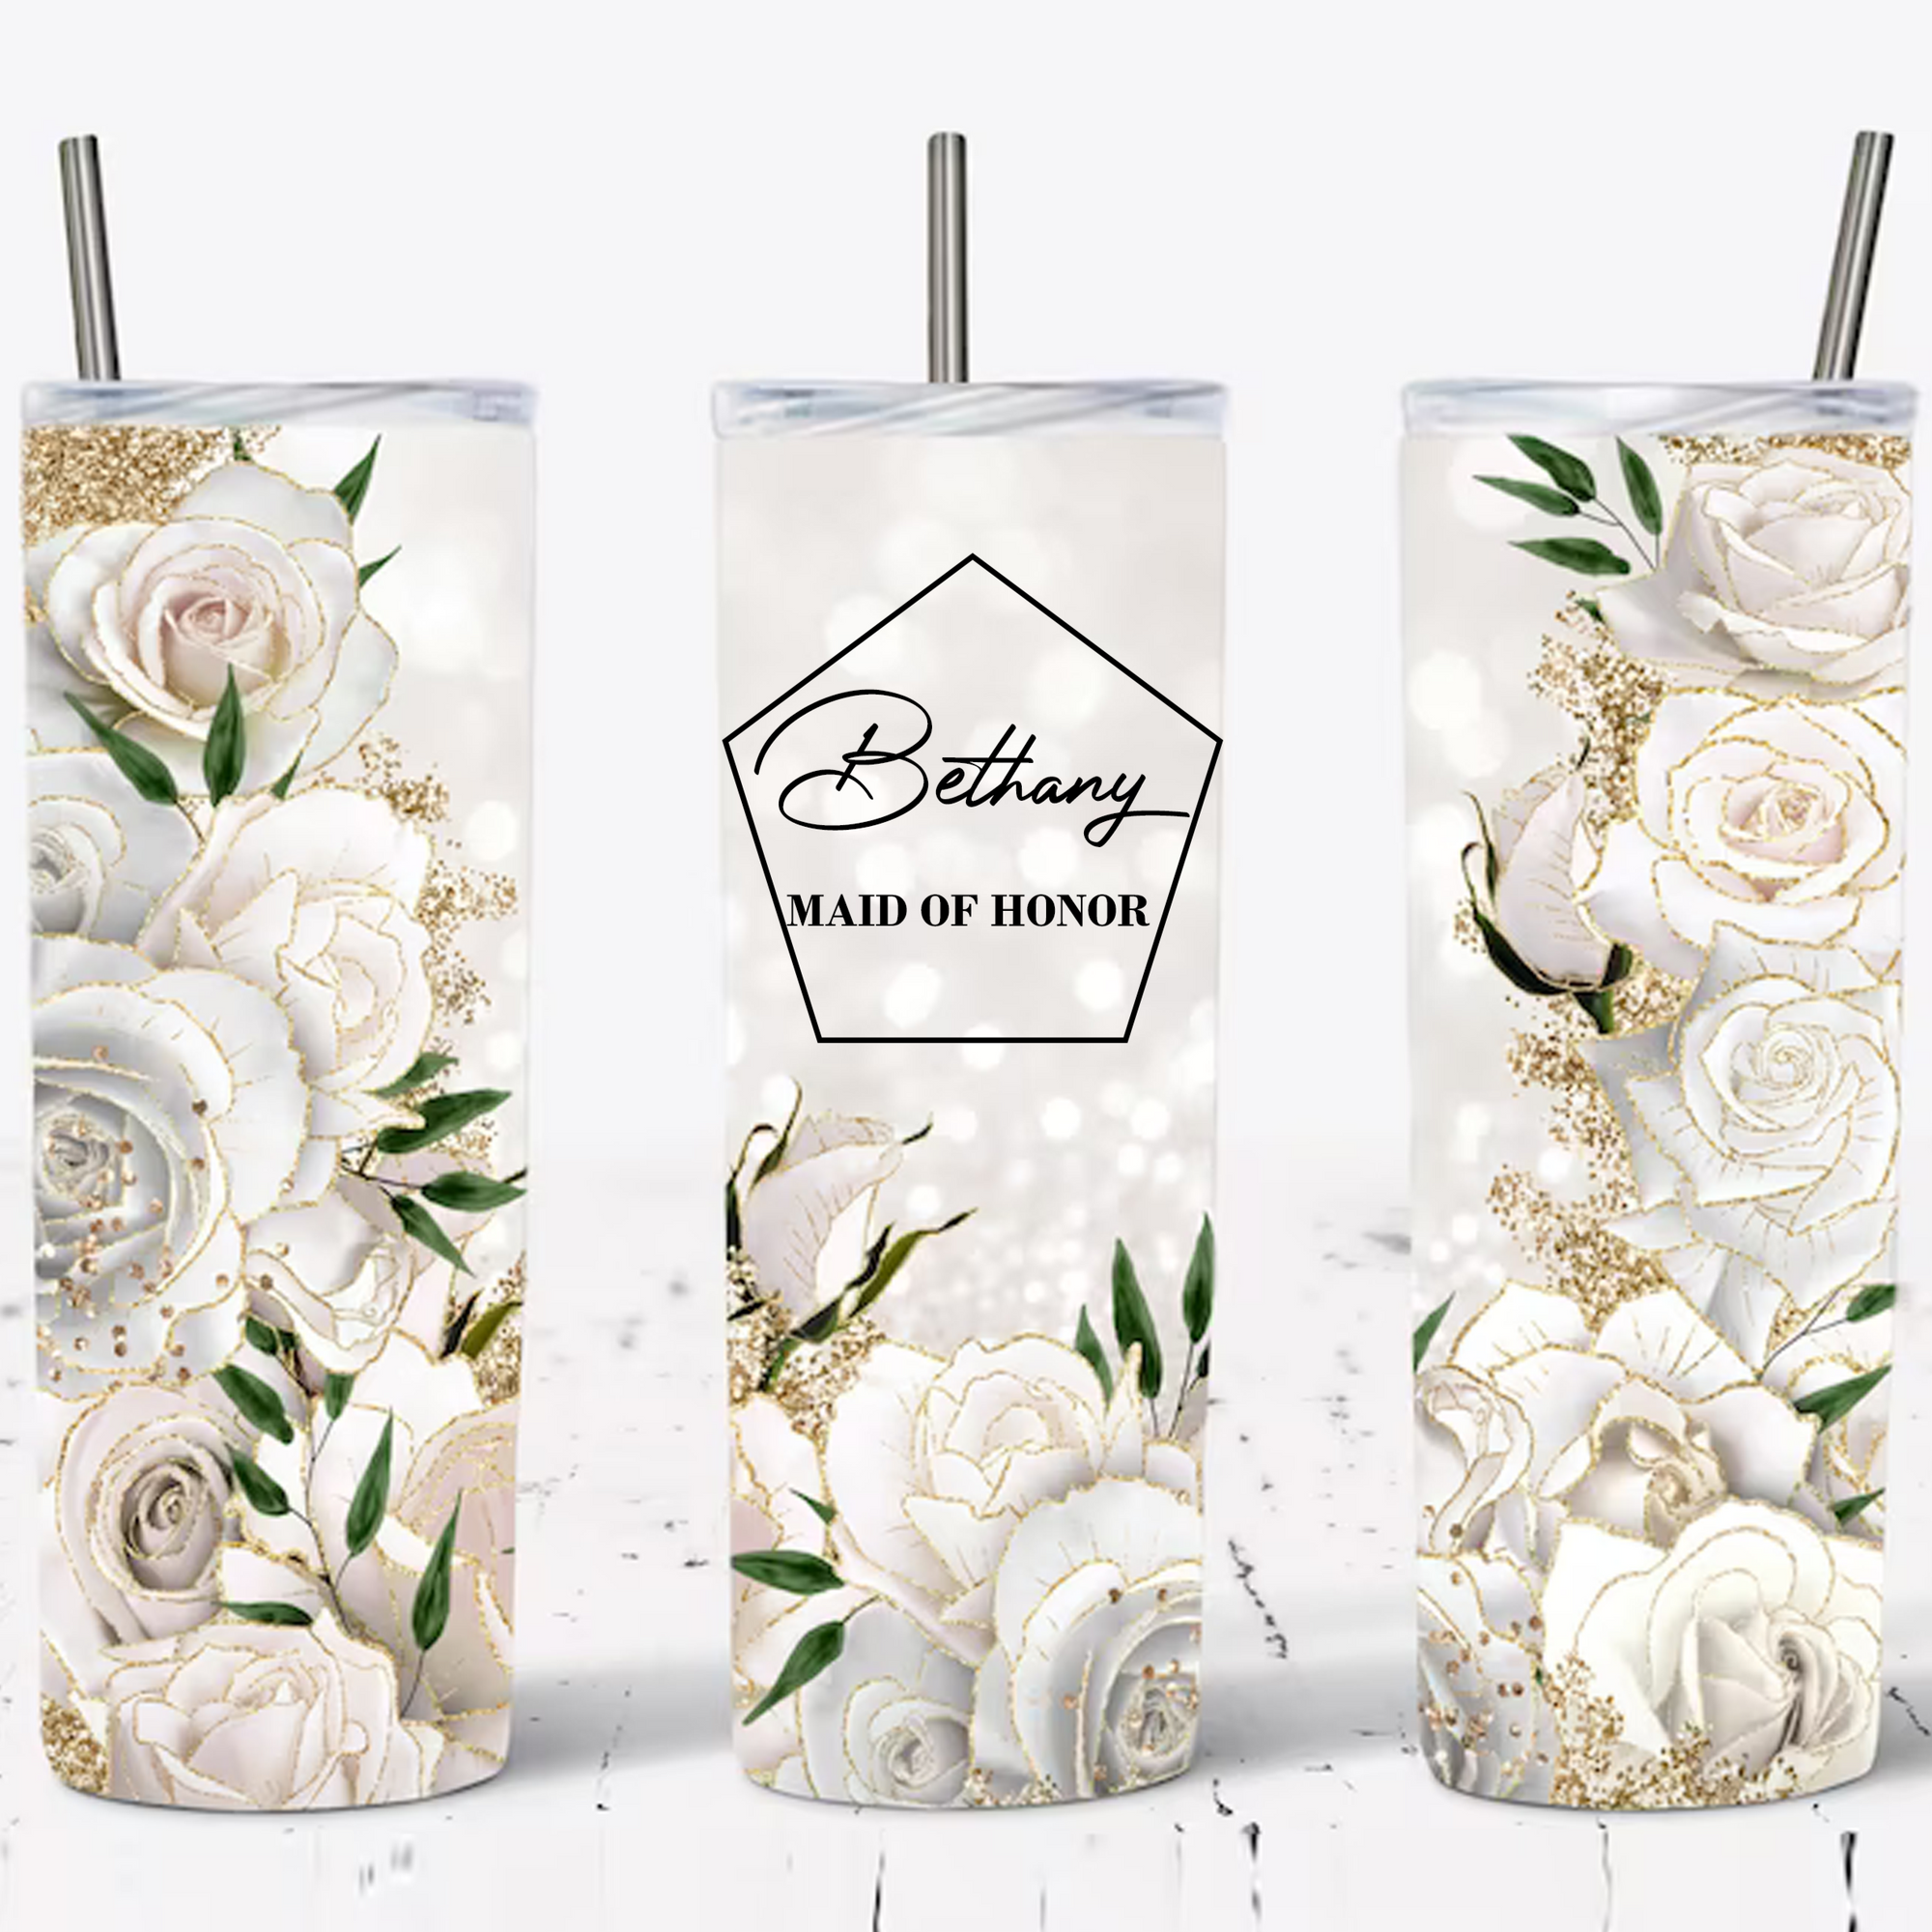 Lily's Atelier Bridesmaid Gifts Set of 5, Personalized Bridesmaid Tumbler  W/Name and Title - 8 Vivid…See more Lily's Atelier Bridesmaid Gifts Set of